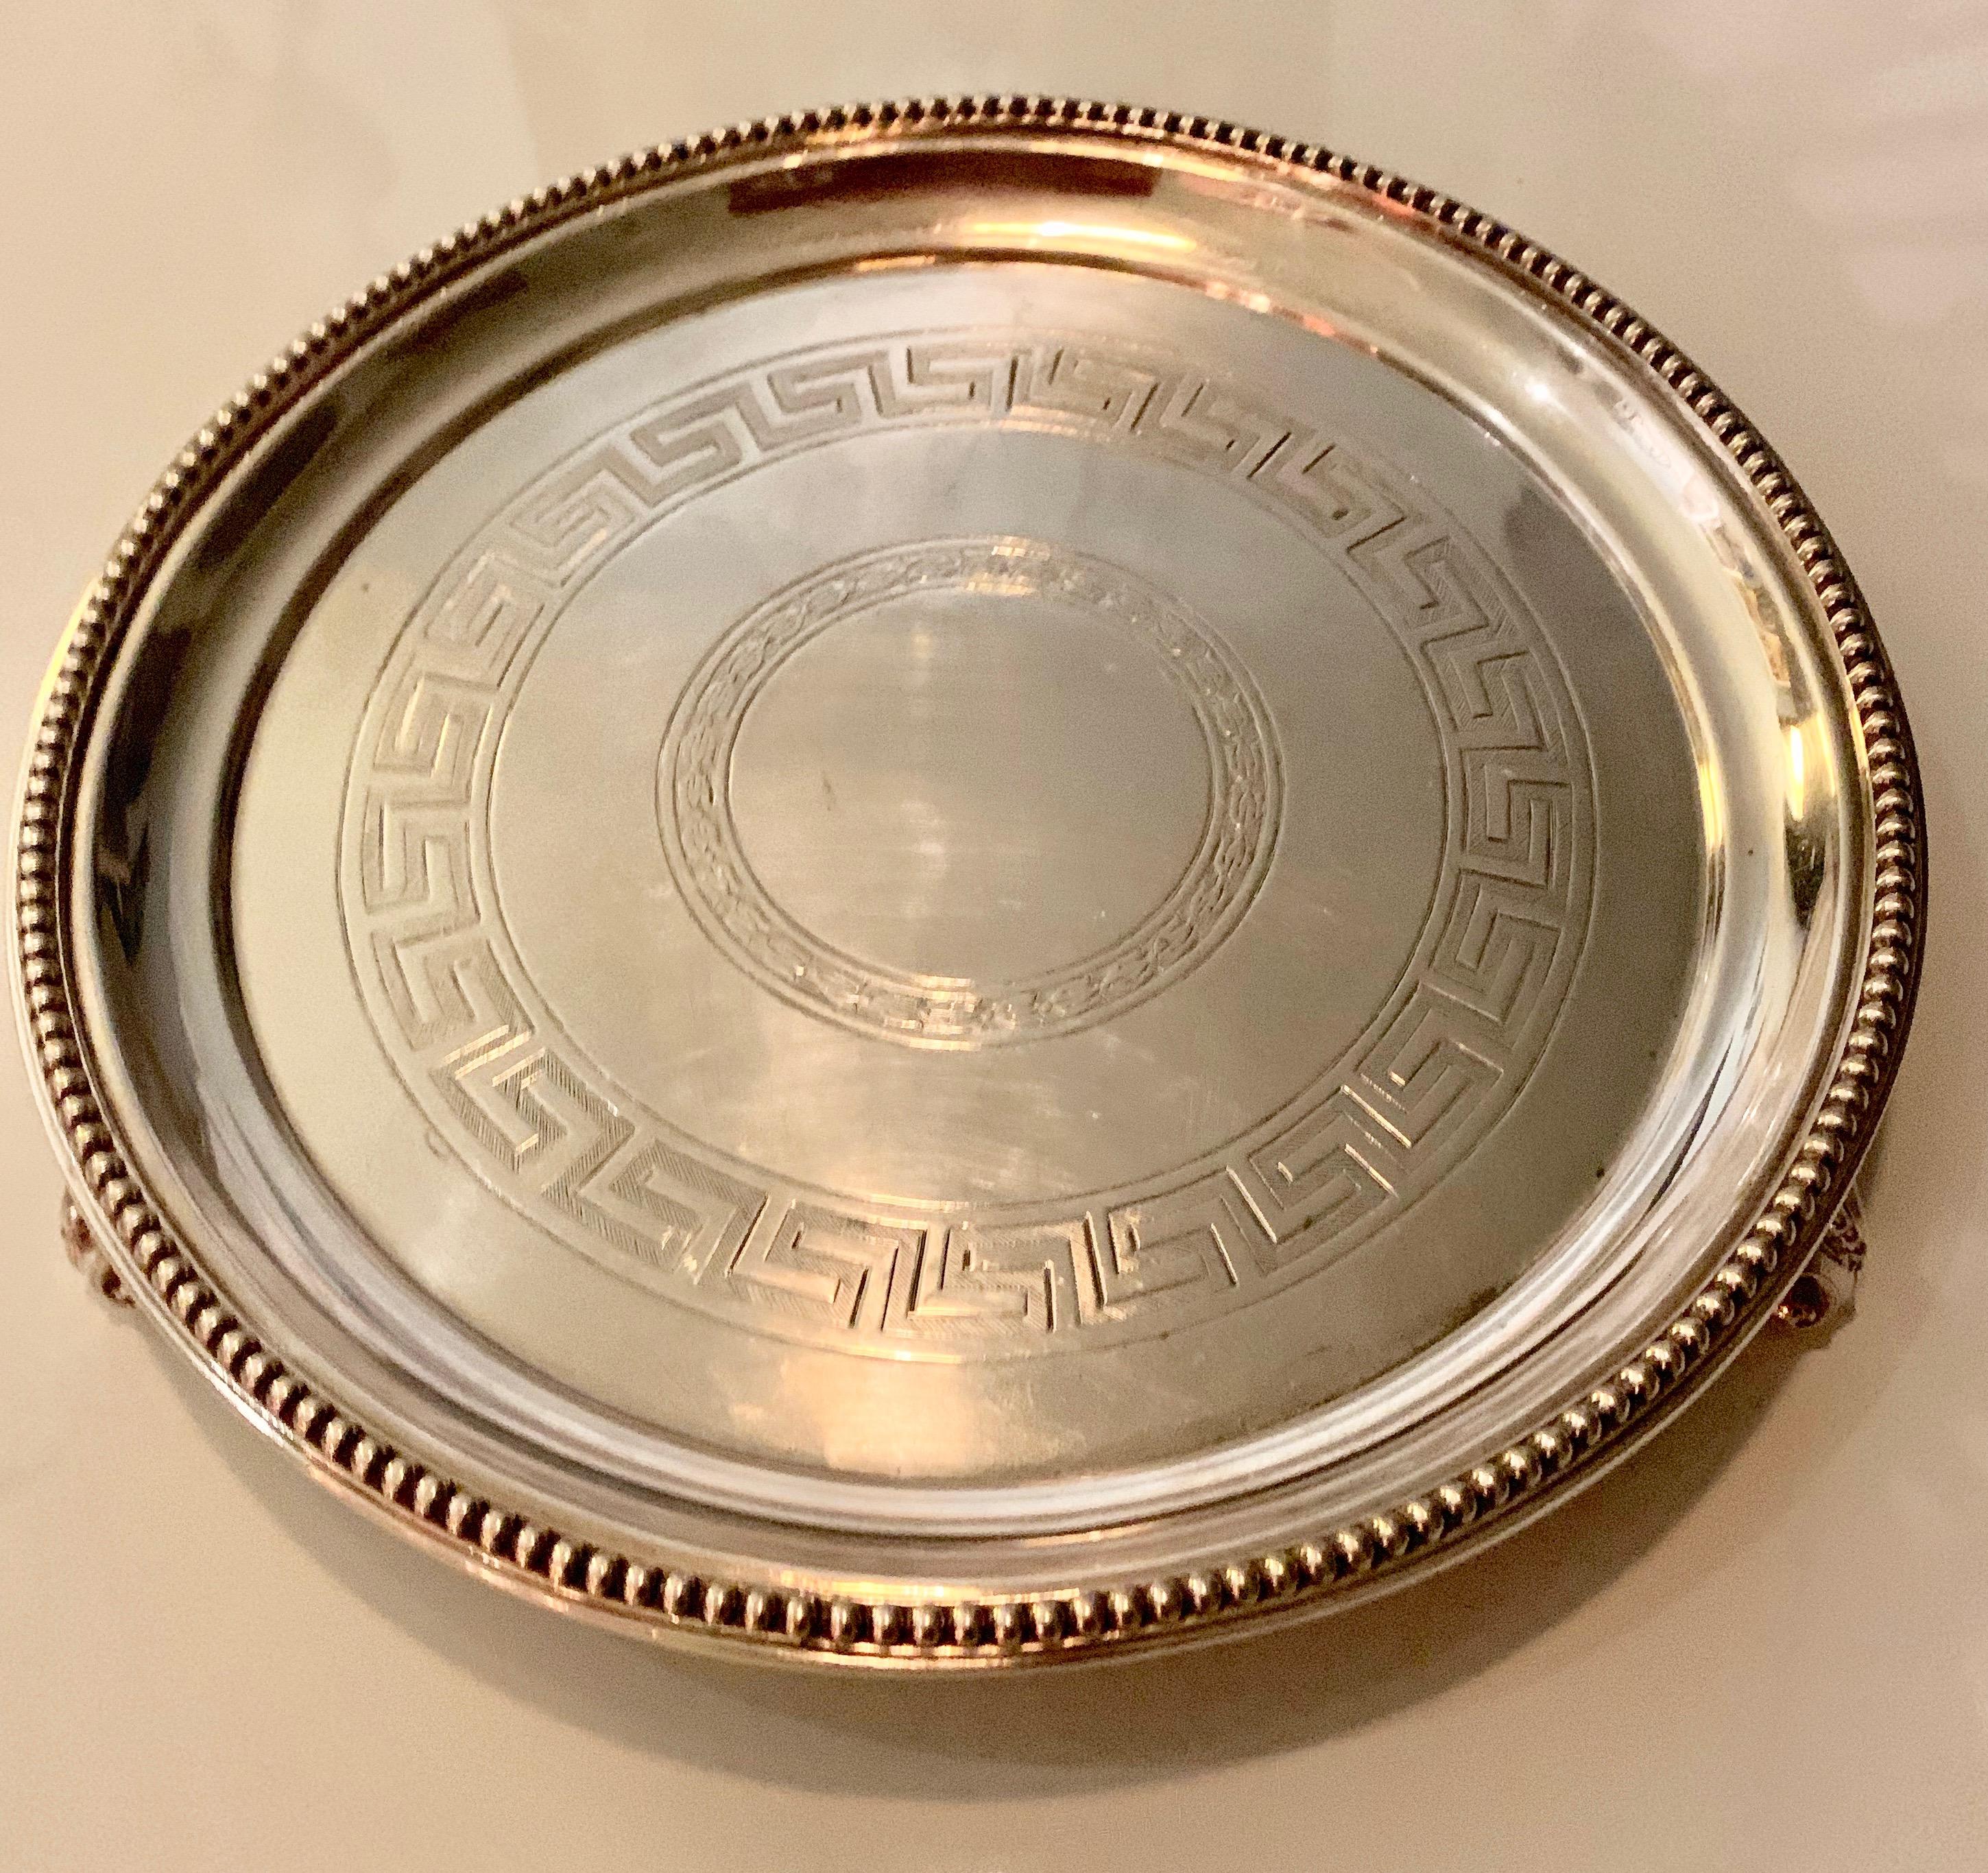 10 inch Silver Plate Greek Key Tray - a very handsome and significantly designed tray - this piece is the perfect compliment to your sophisticated bar... reminiscent of Georg Jensen, the feet are applied with small spheres in Silver. A great serving